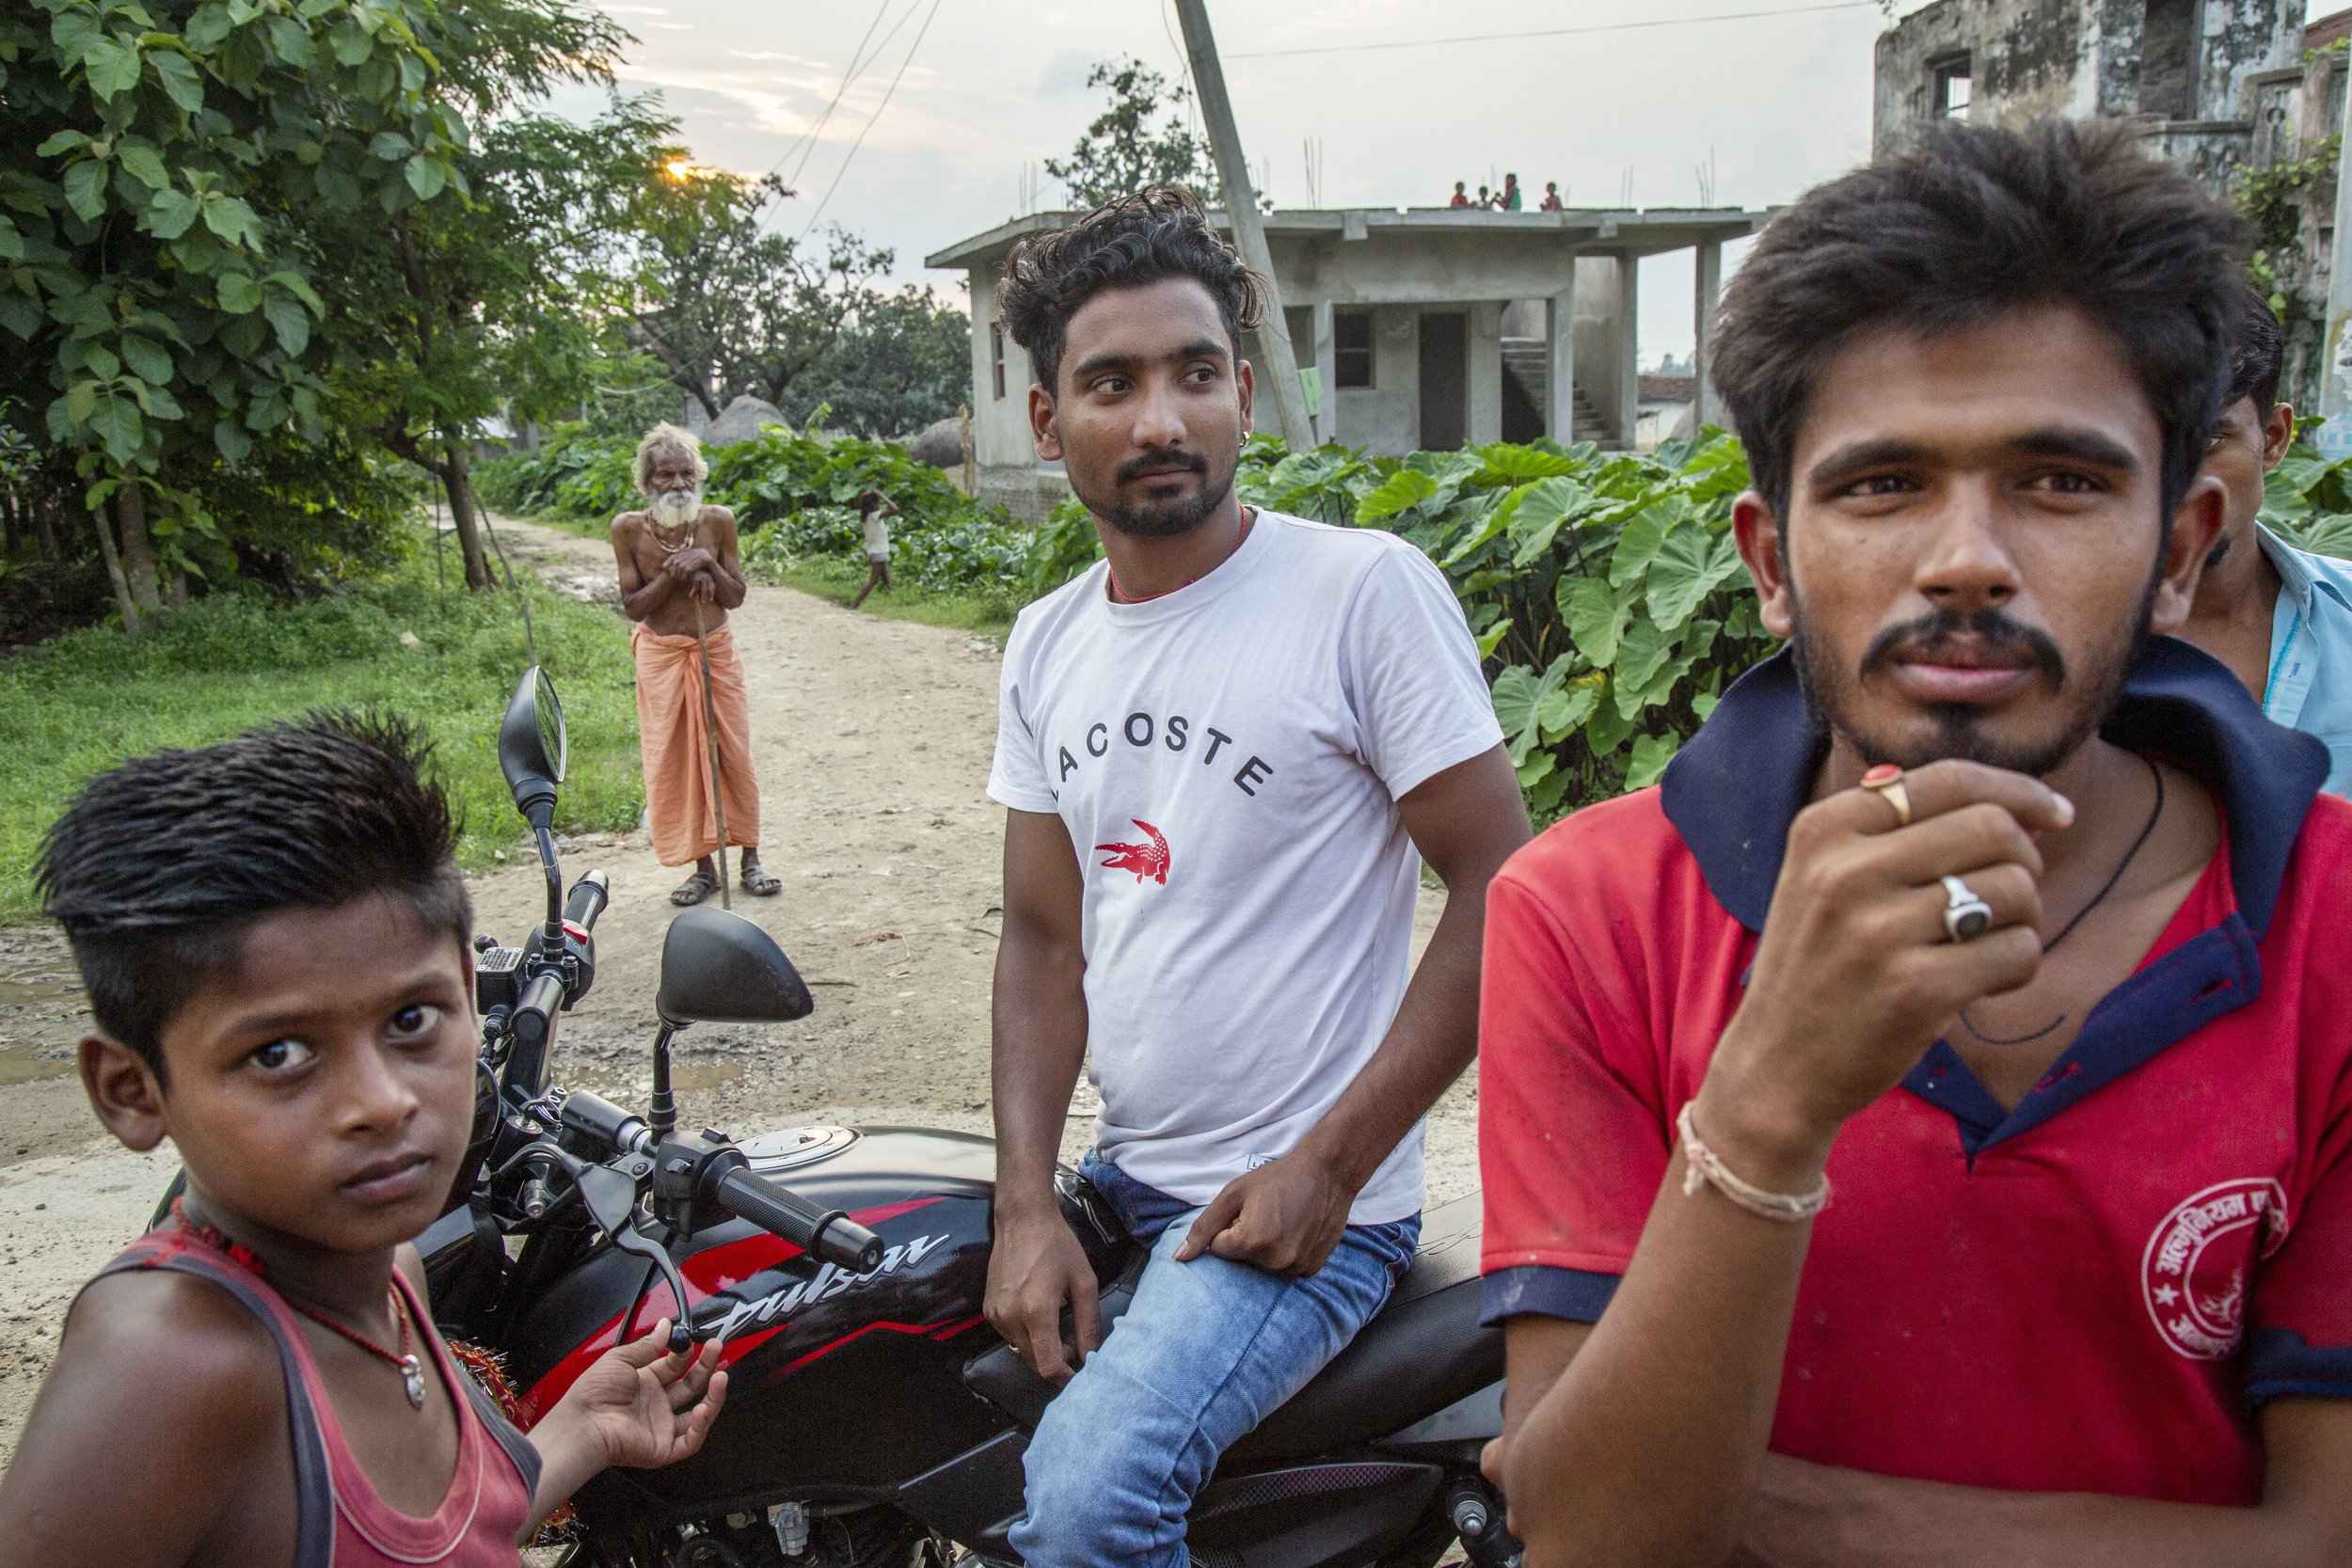  Nepali men on motorbikes hang out in the village of Nagrain 9, in the Ghodhas District outside of Janakpur, Nepal on June 30, 2022. 